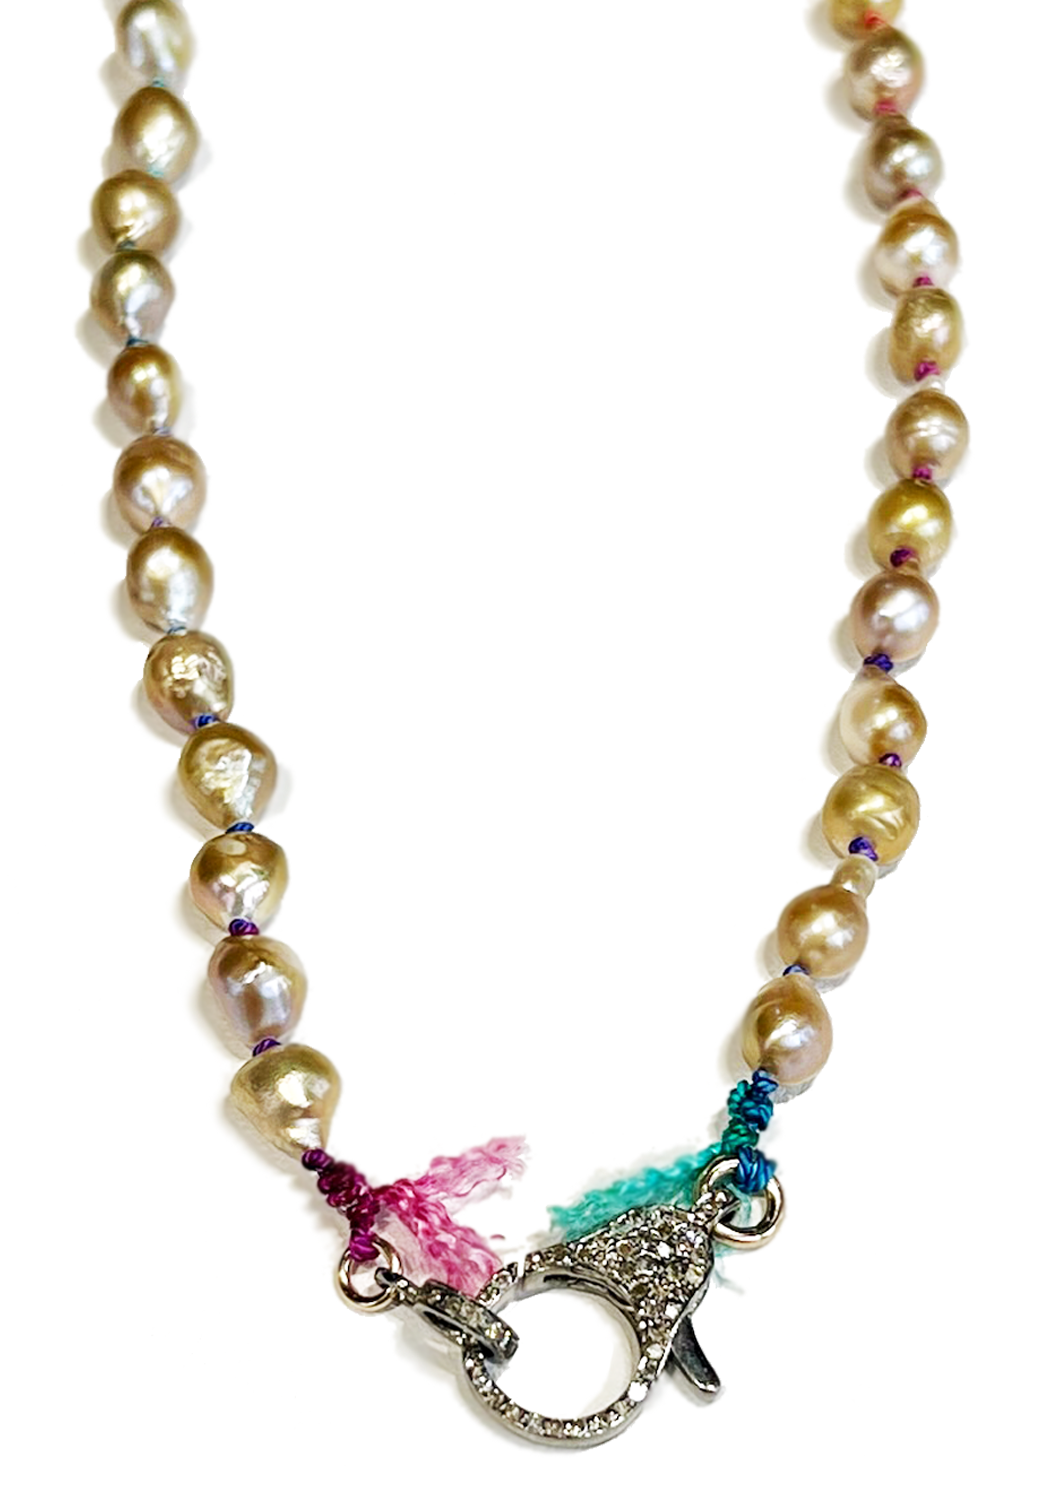 Catherine Michiels South Sea Pearl Necklace with Diamond Clasp | OsterJewelers.com